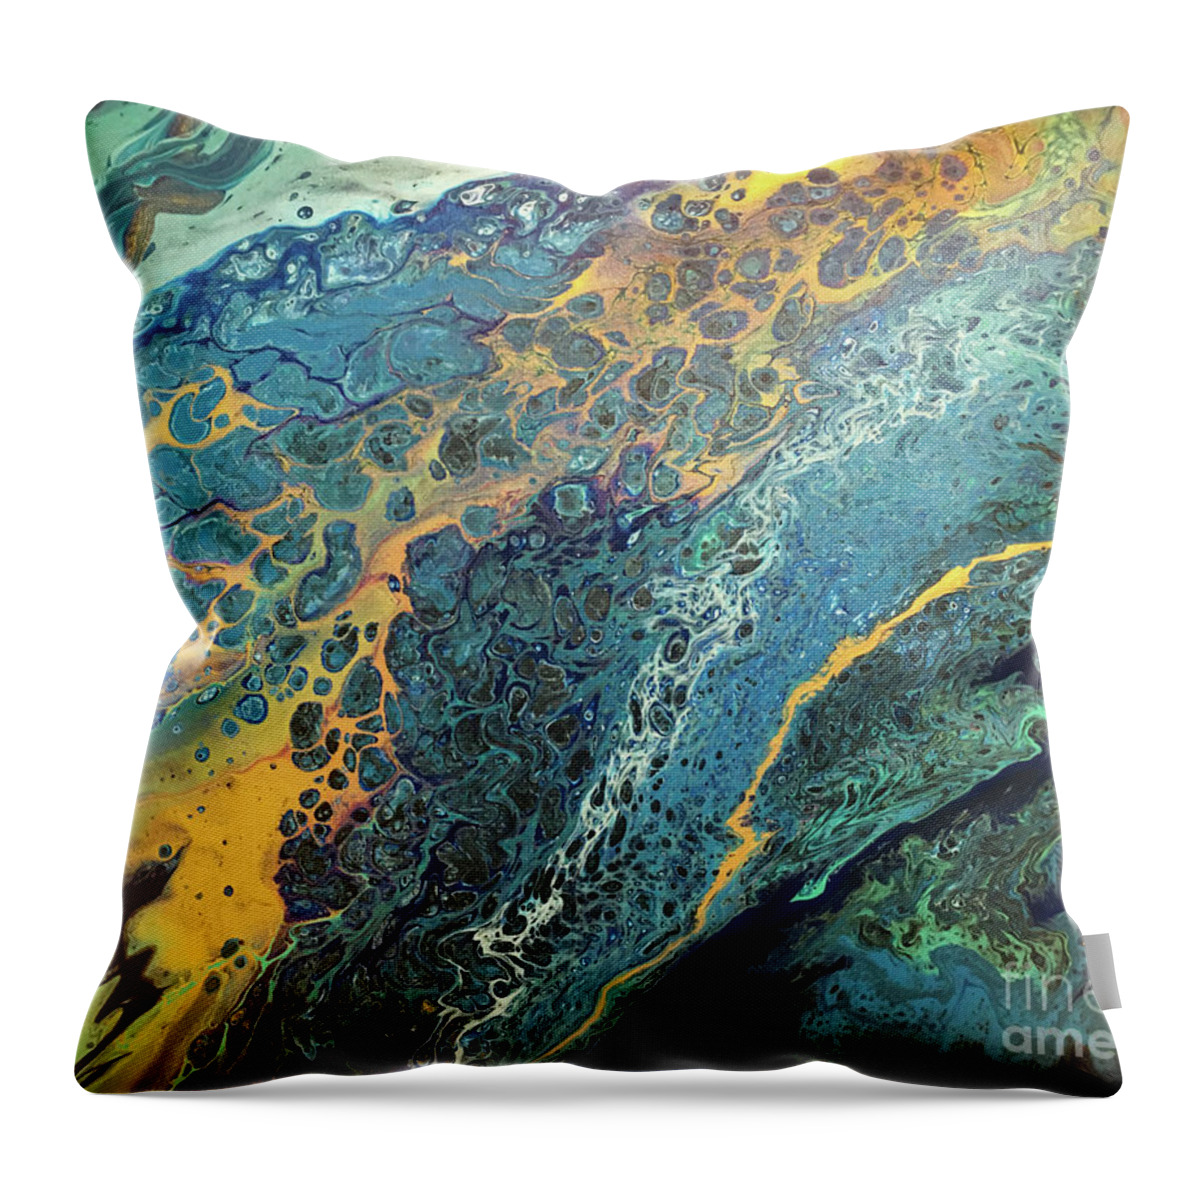 Poured Acrylic Throw Pillow featuring the painting Alien Lands by Lucy Arnold